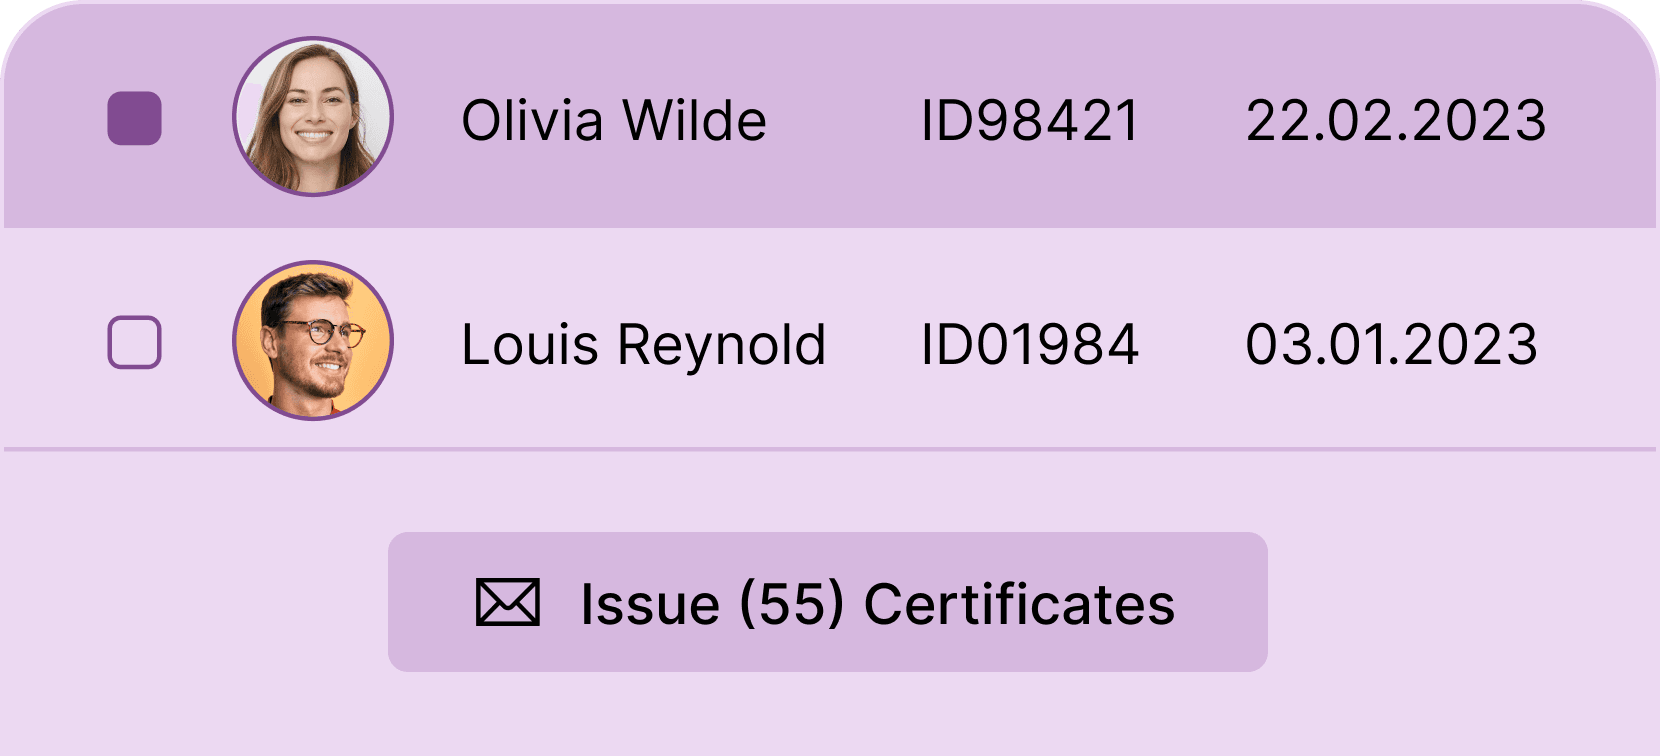 Send emails with certificates - Certifier features